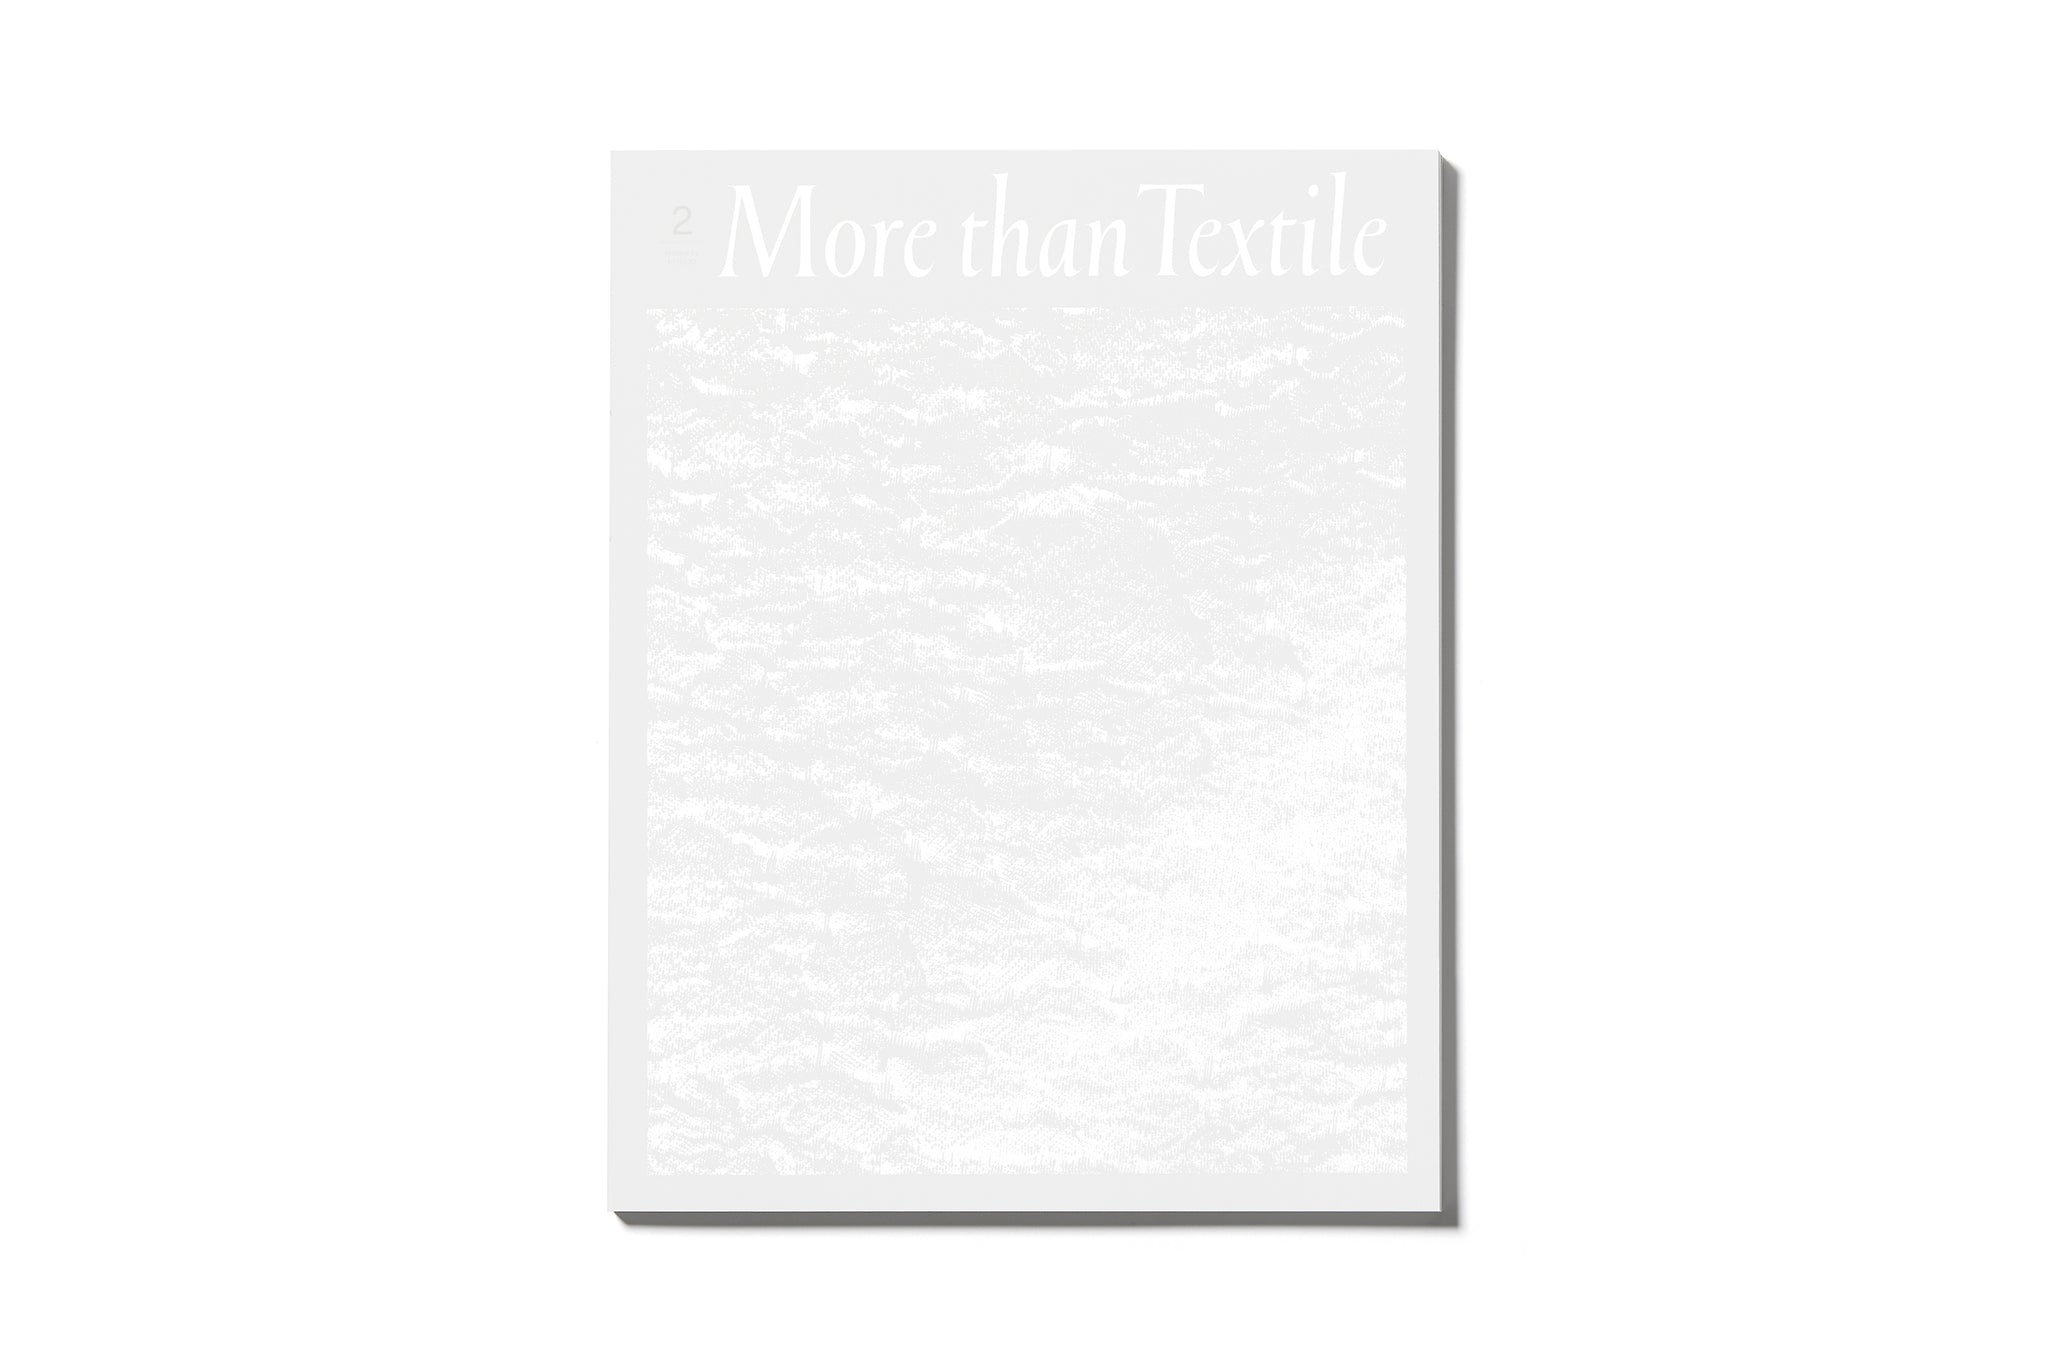 HOSOO Magazine "More than Textile" issue 02